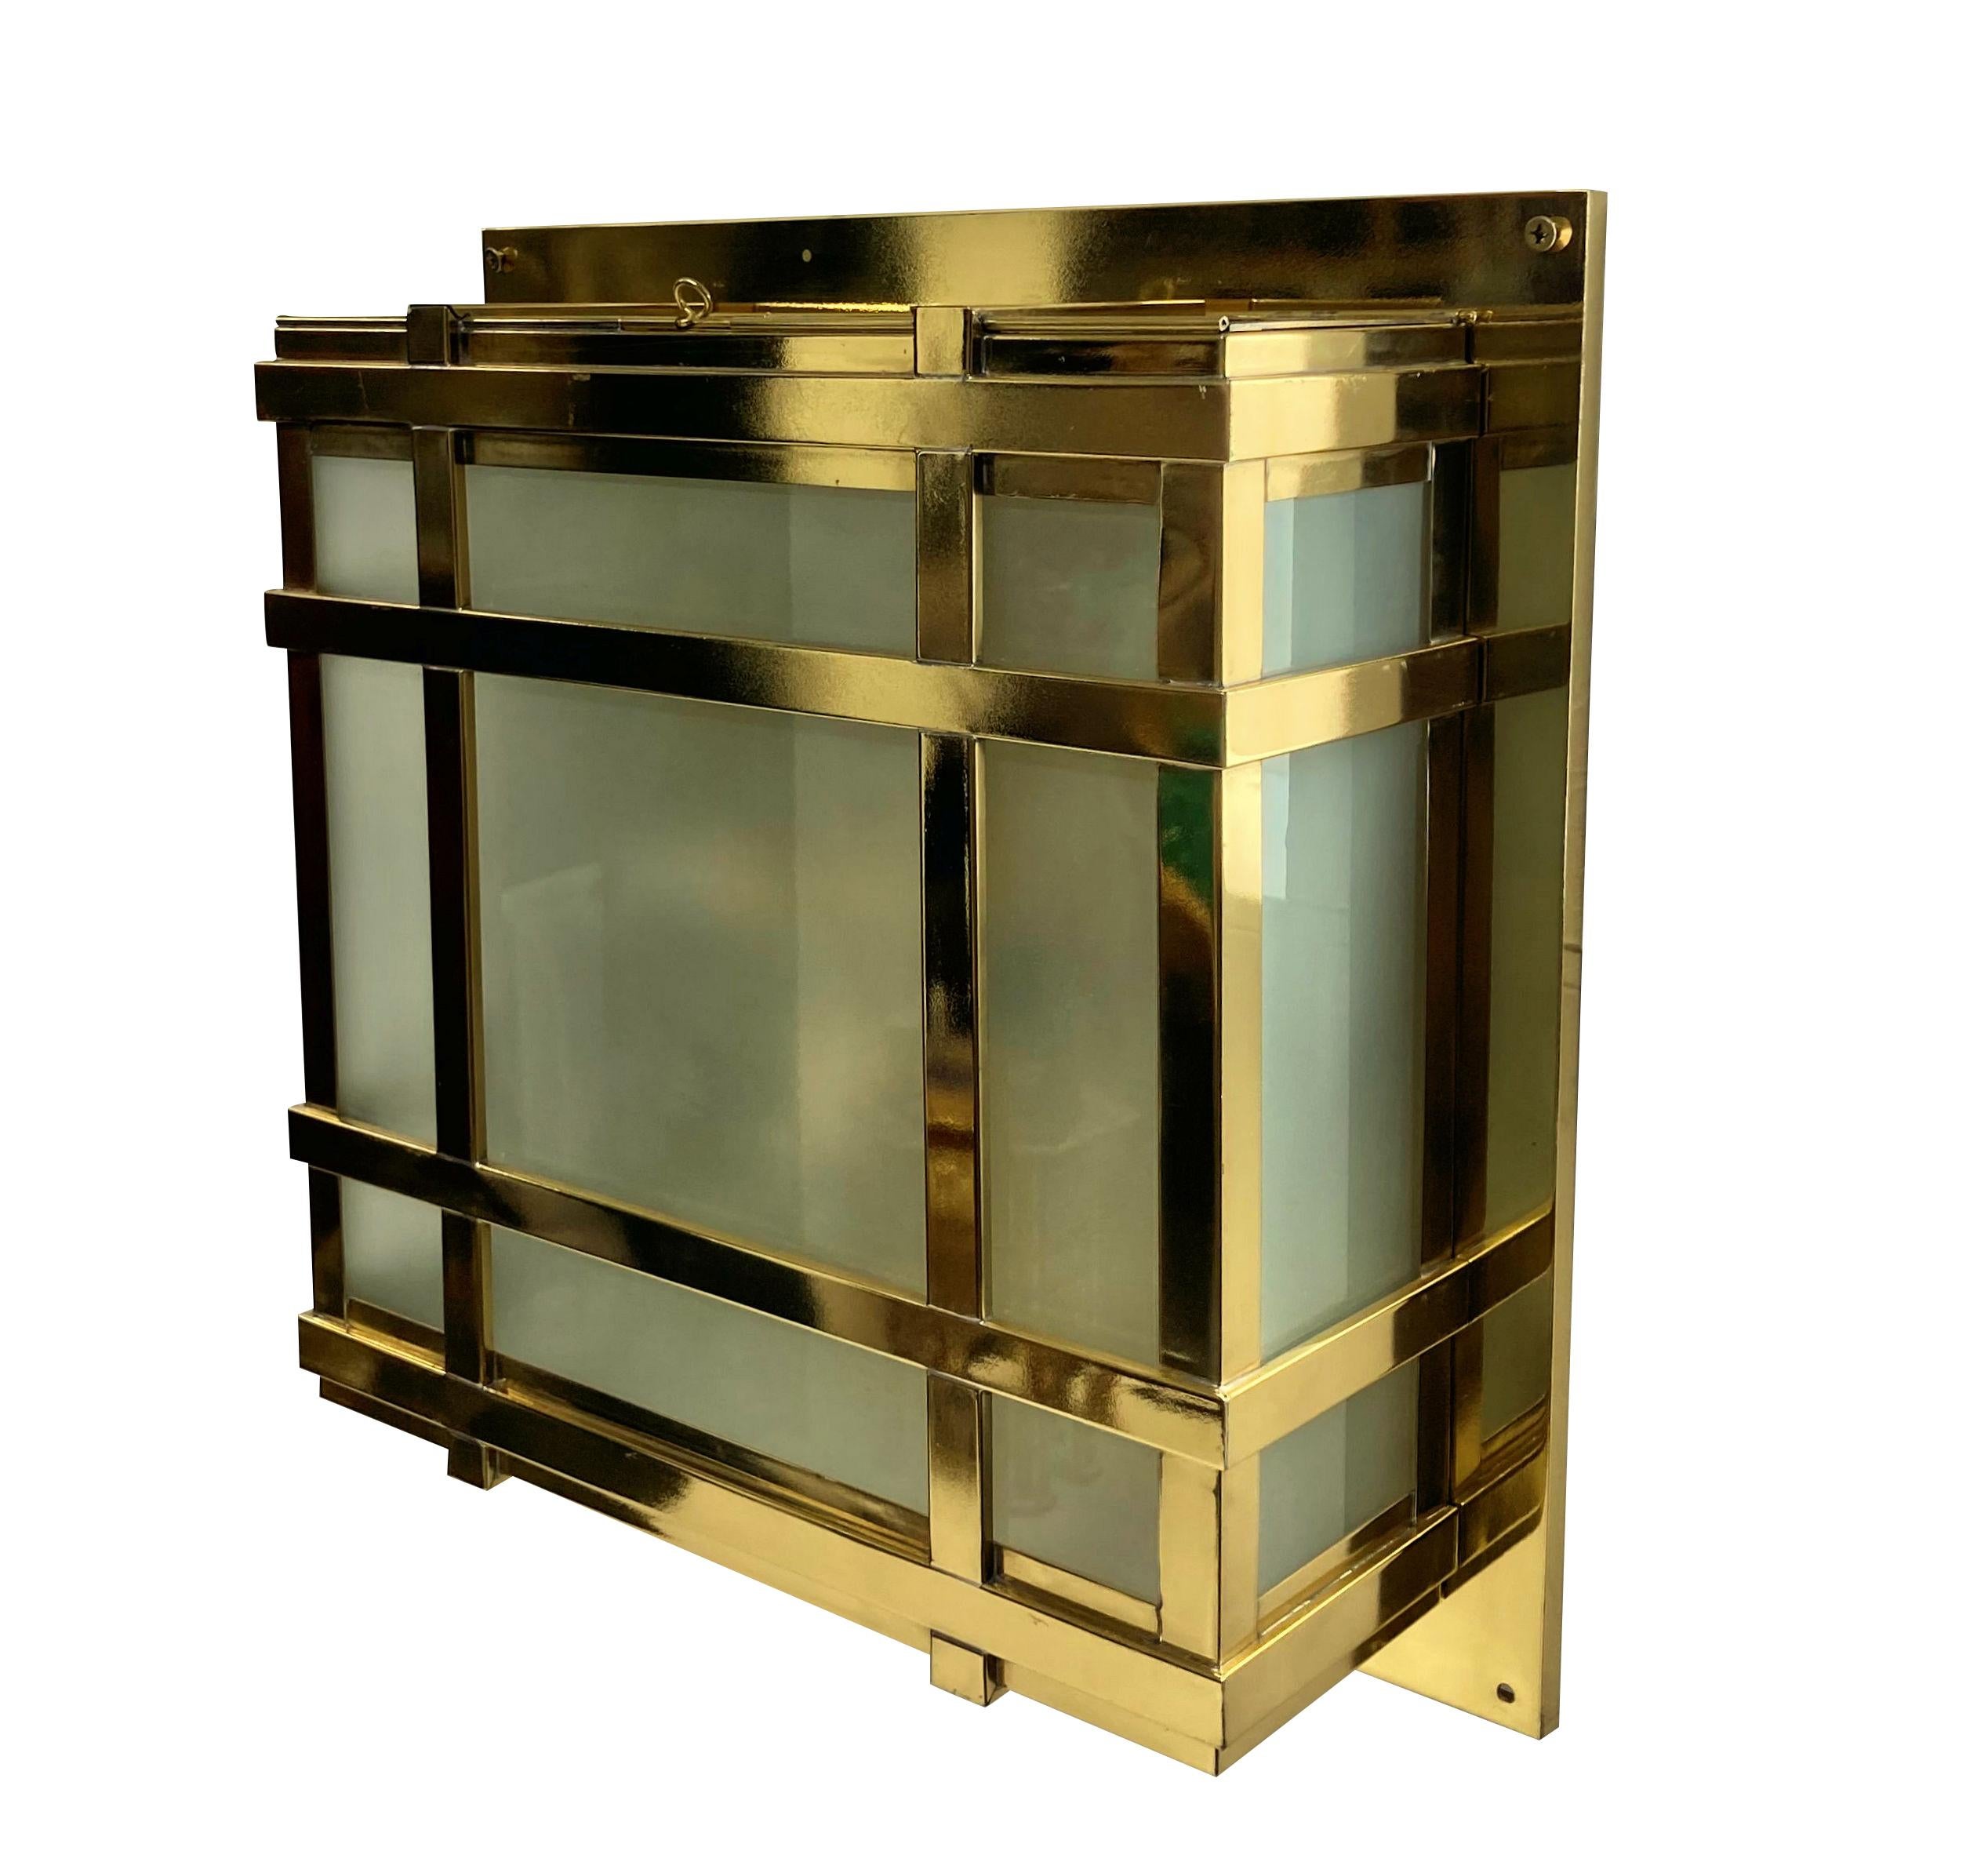 A set of four large American Modernist wall lights in lacquered brass, with opaque glass panels. Each with a door and provision for four lights inside each.